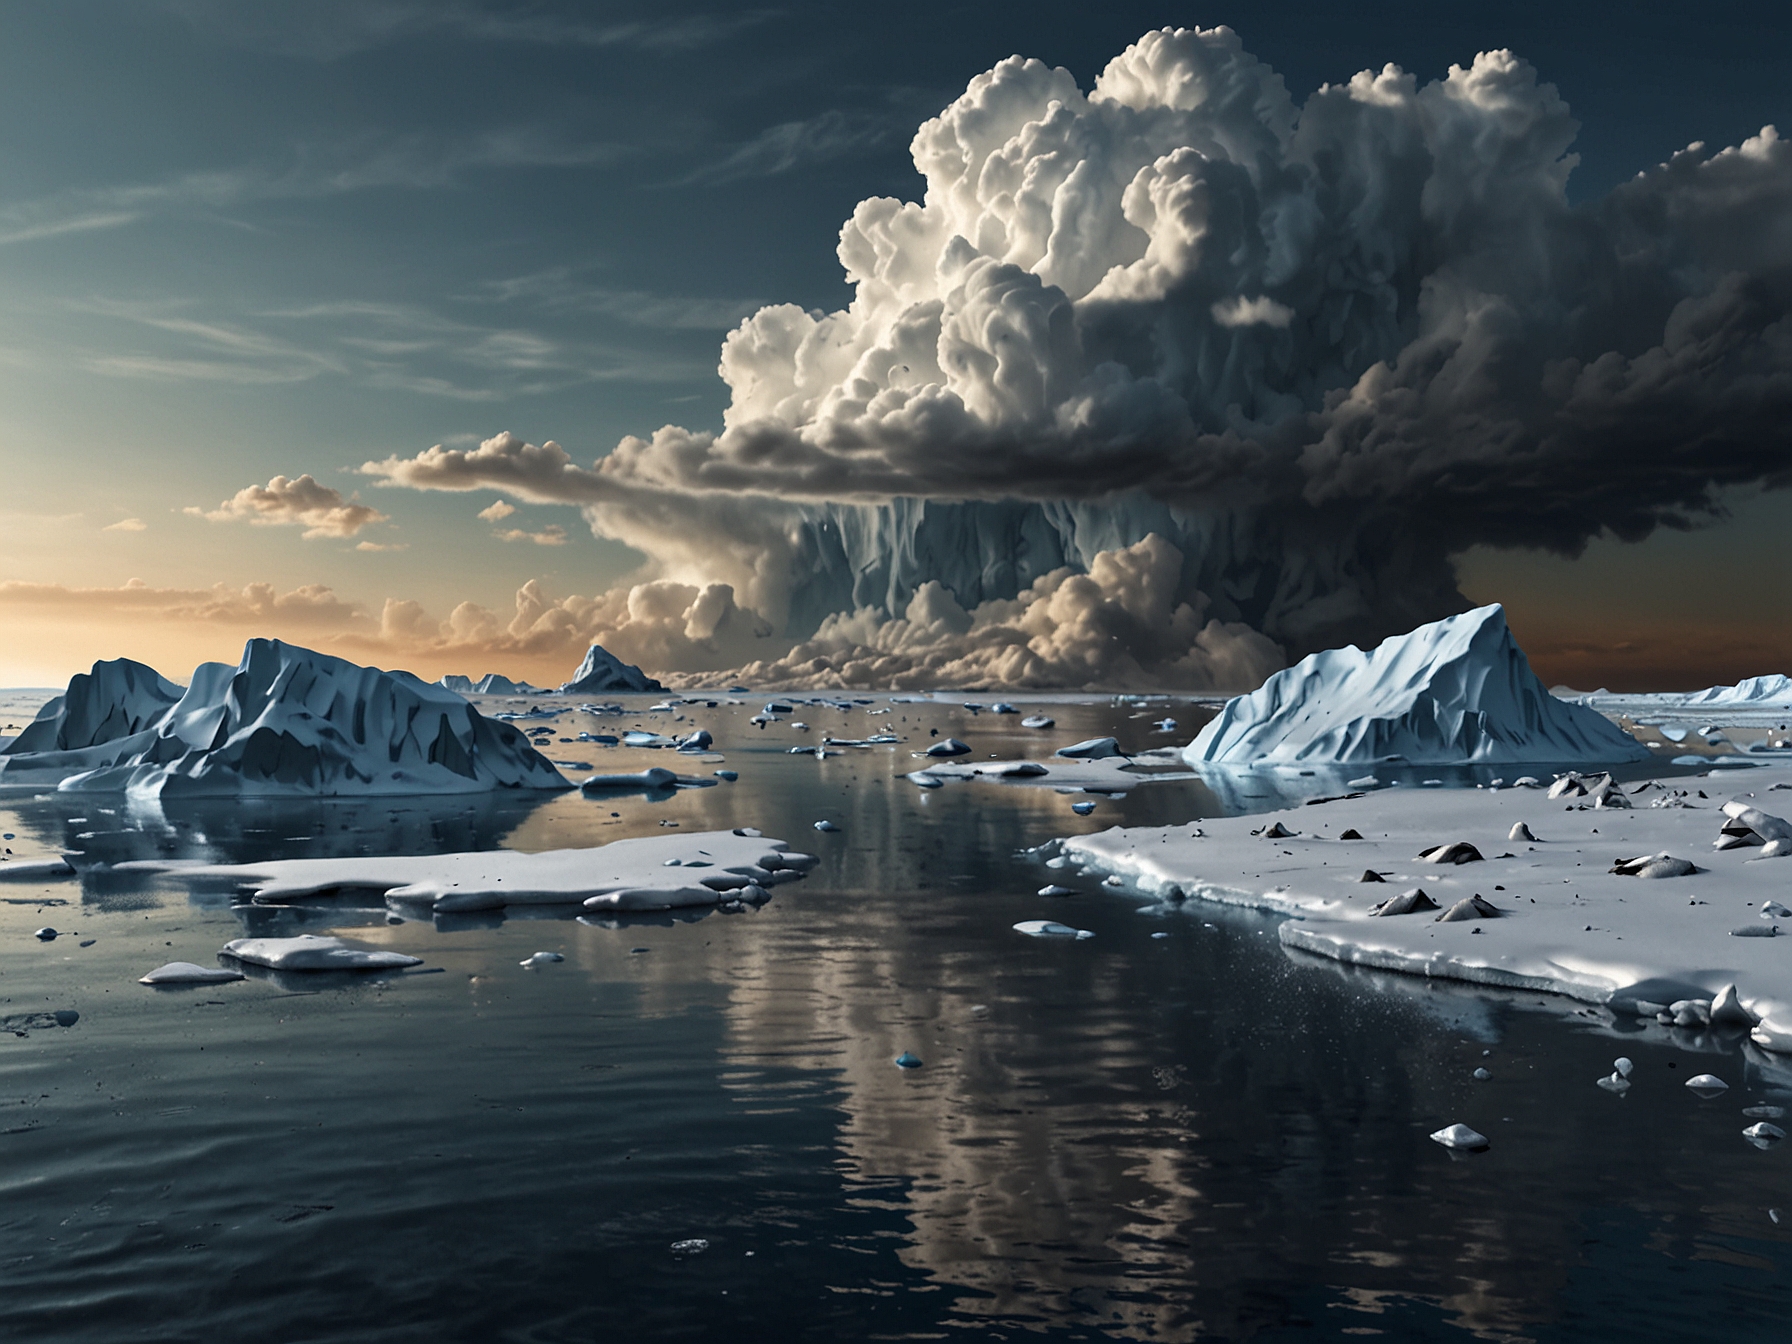 An image showing significant global warming effects like melting ice caps and rising sea levels.